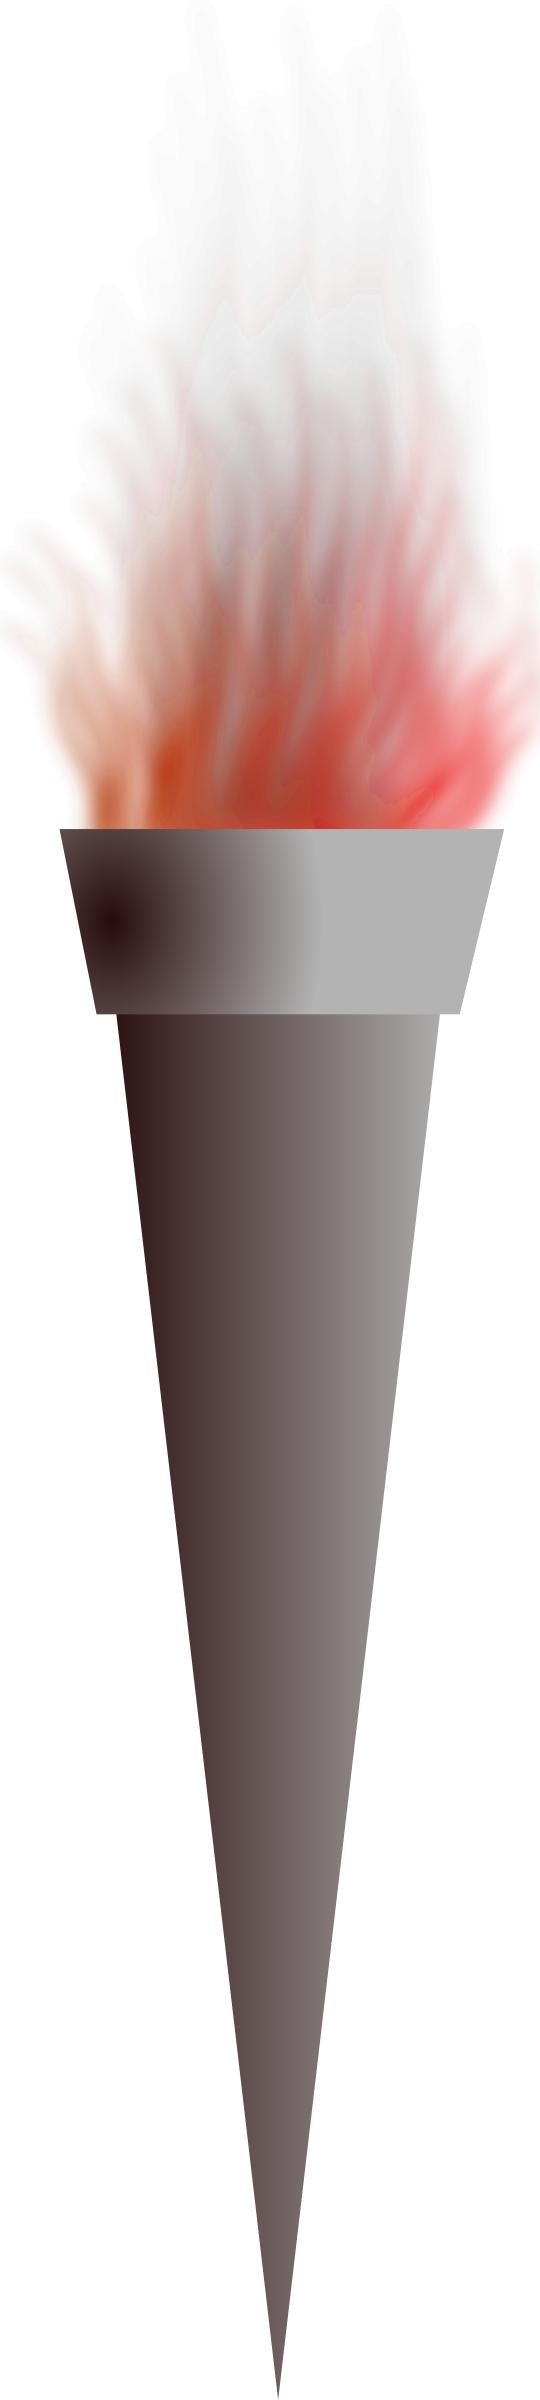 torch png